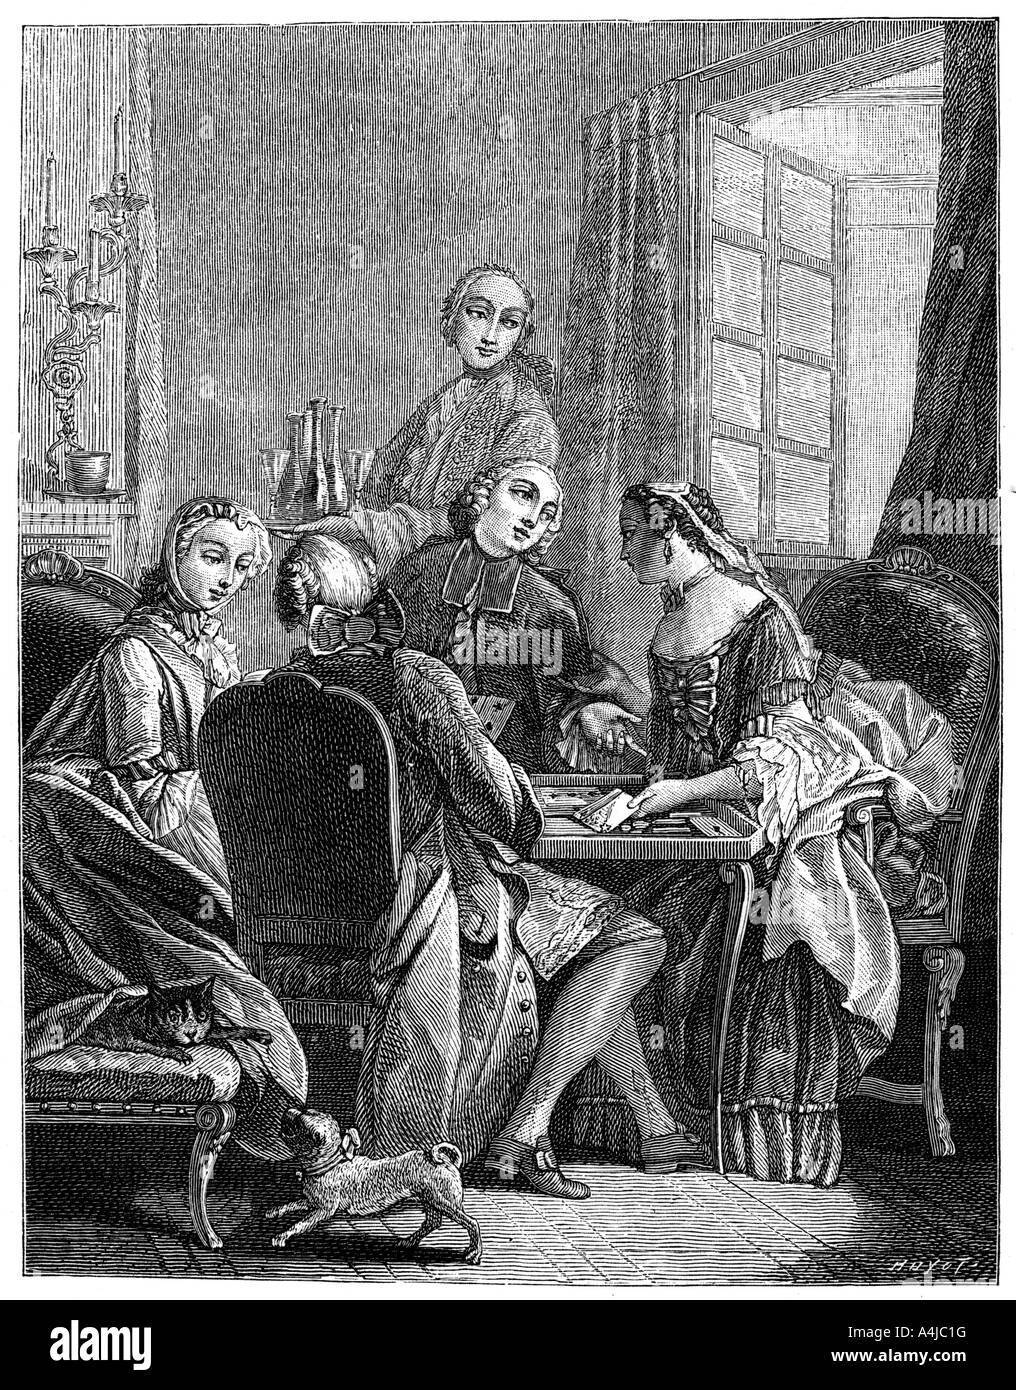 The Count In The Living Room, (1885).Artist: Eisen Stock Photo